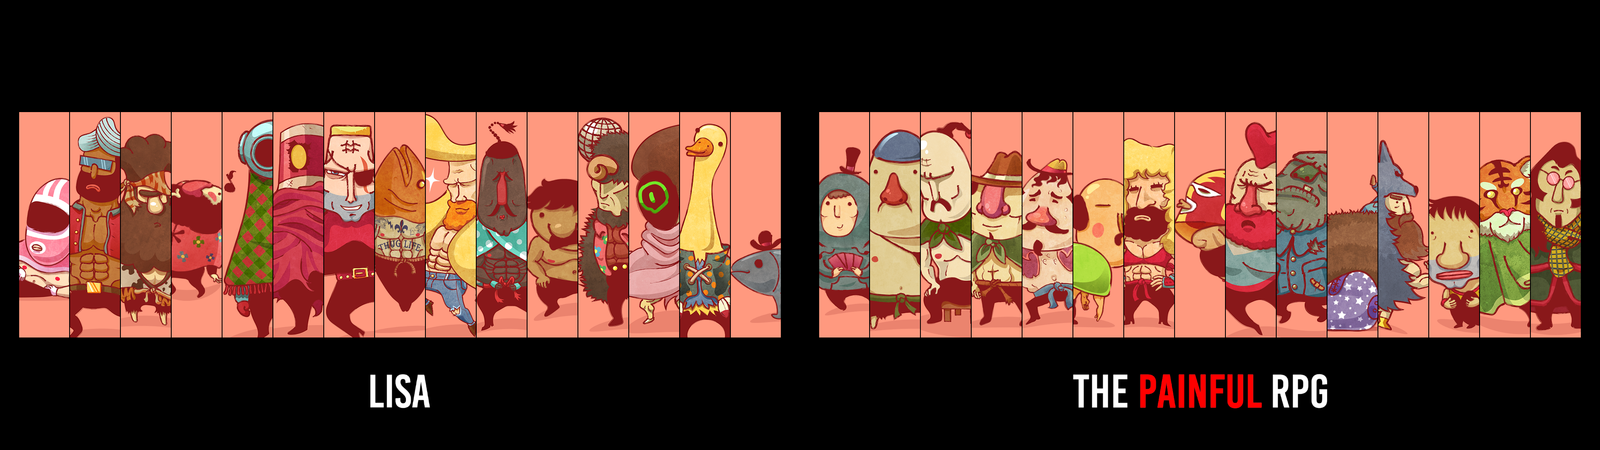 Lisa The Painful Rpg Dual Wallpaper By Cabbagecanfly